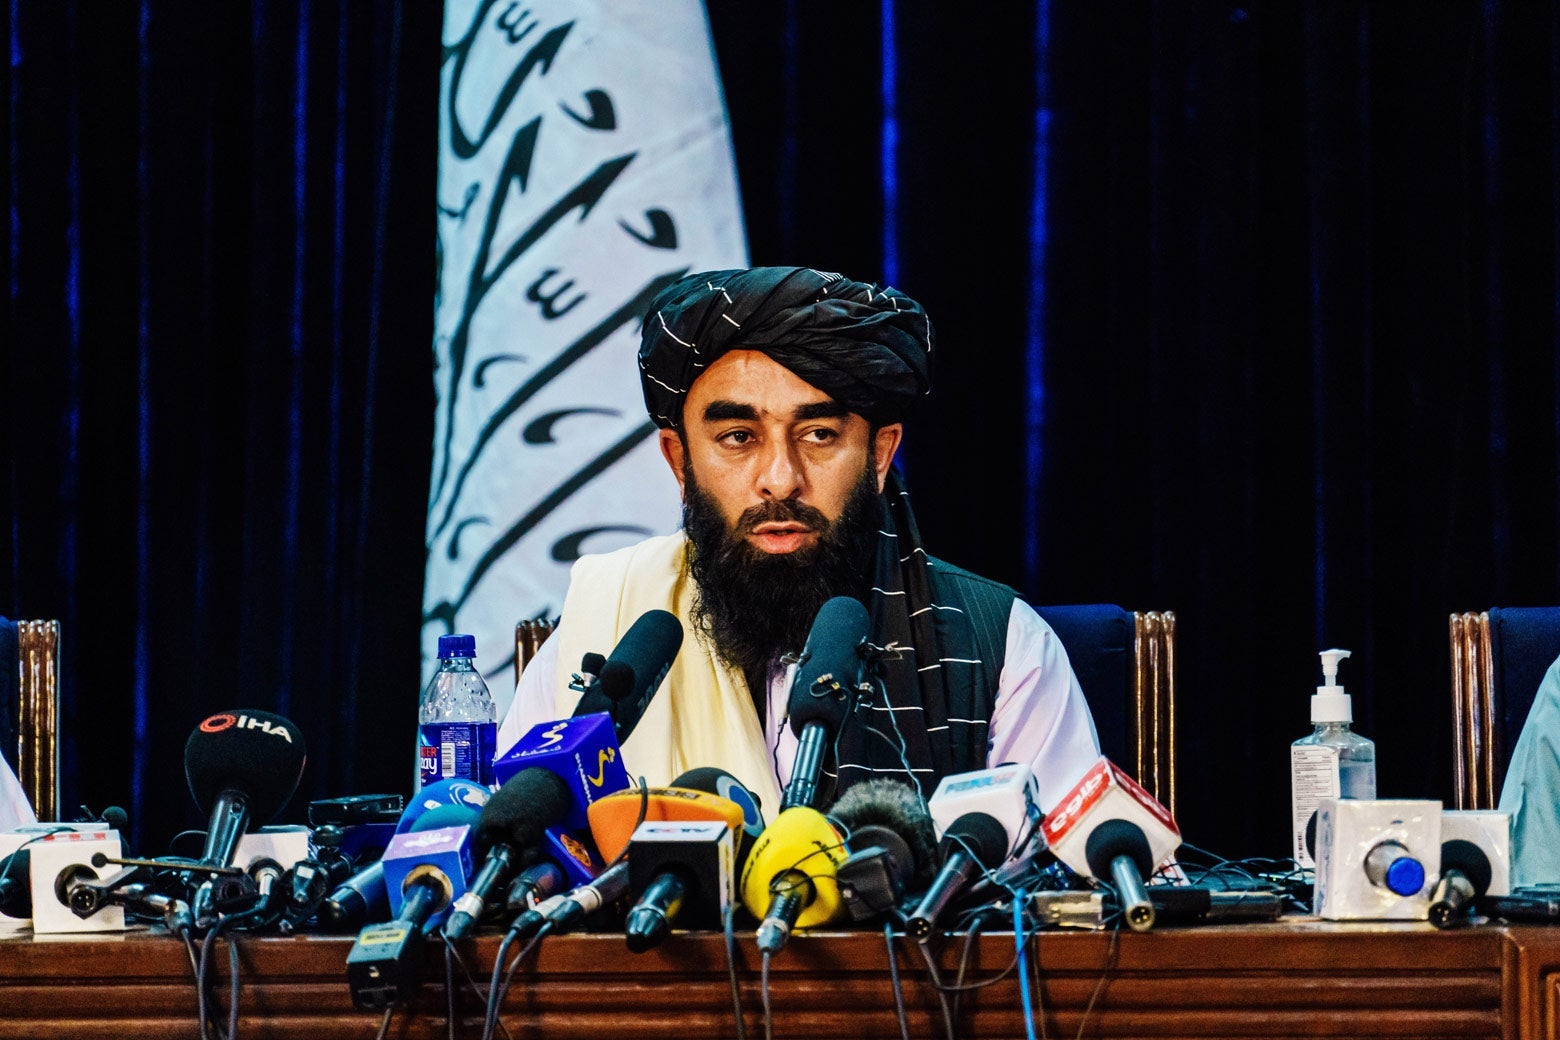 A man in with a beard and his head covered sits behind a row of microphones.